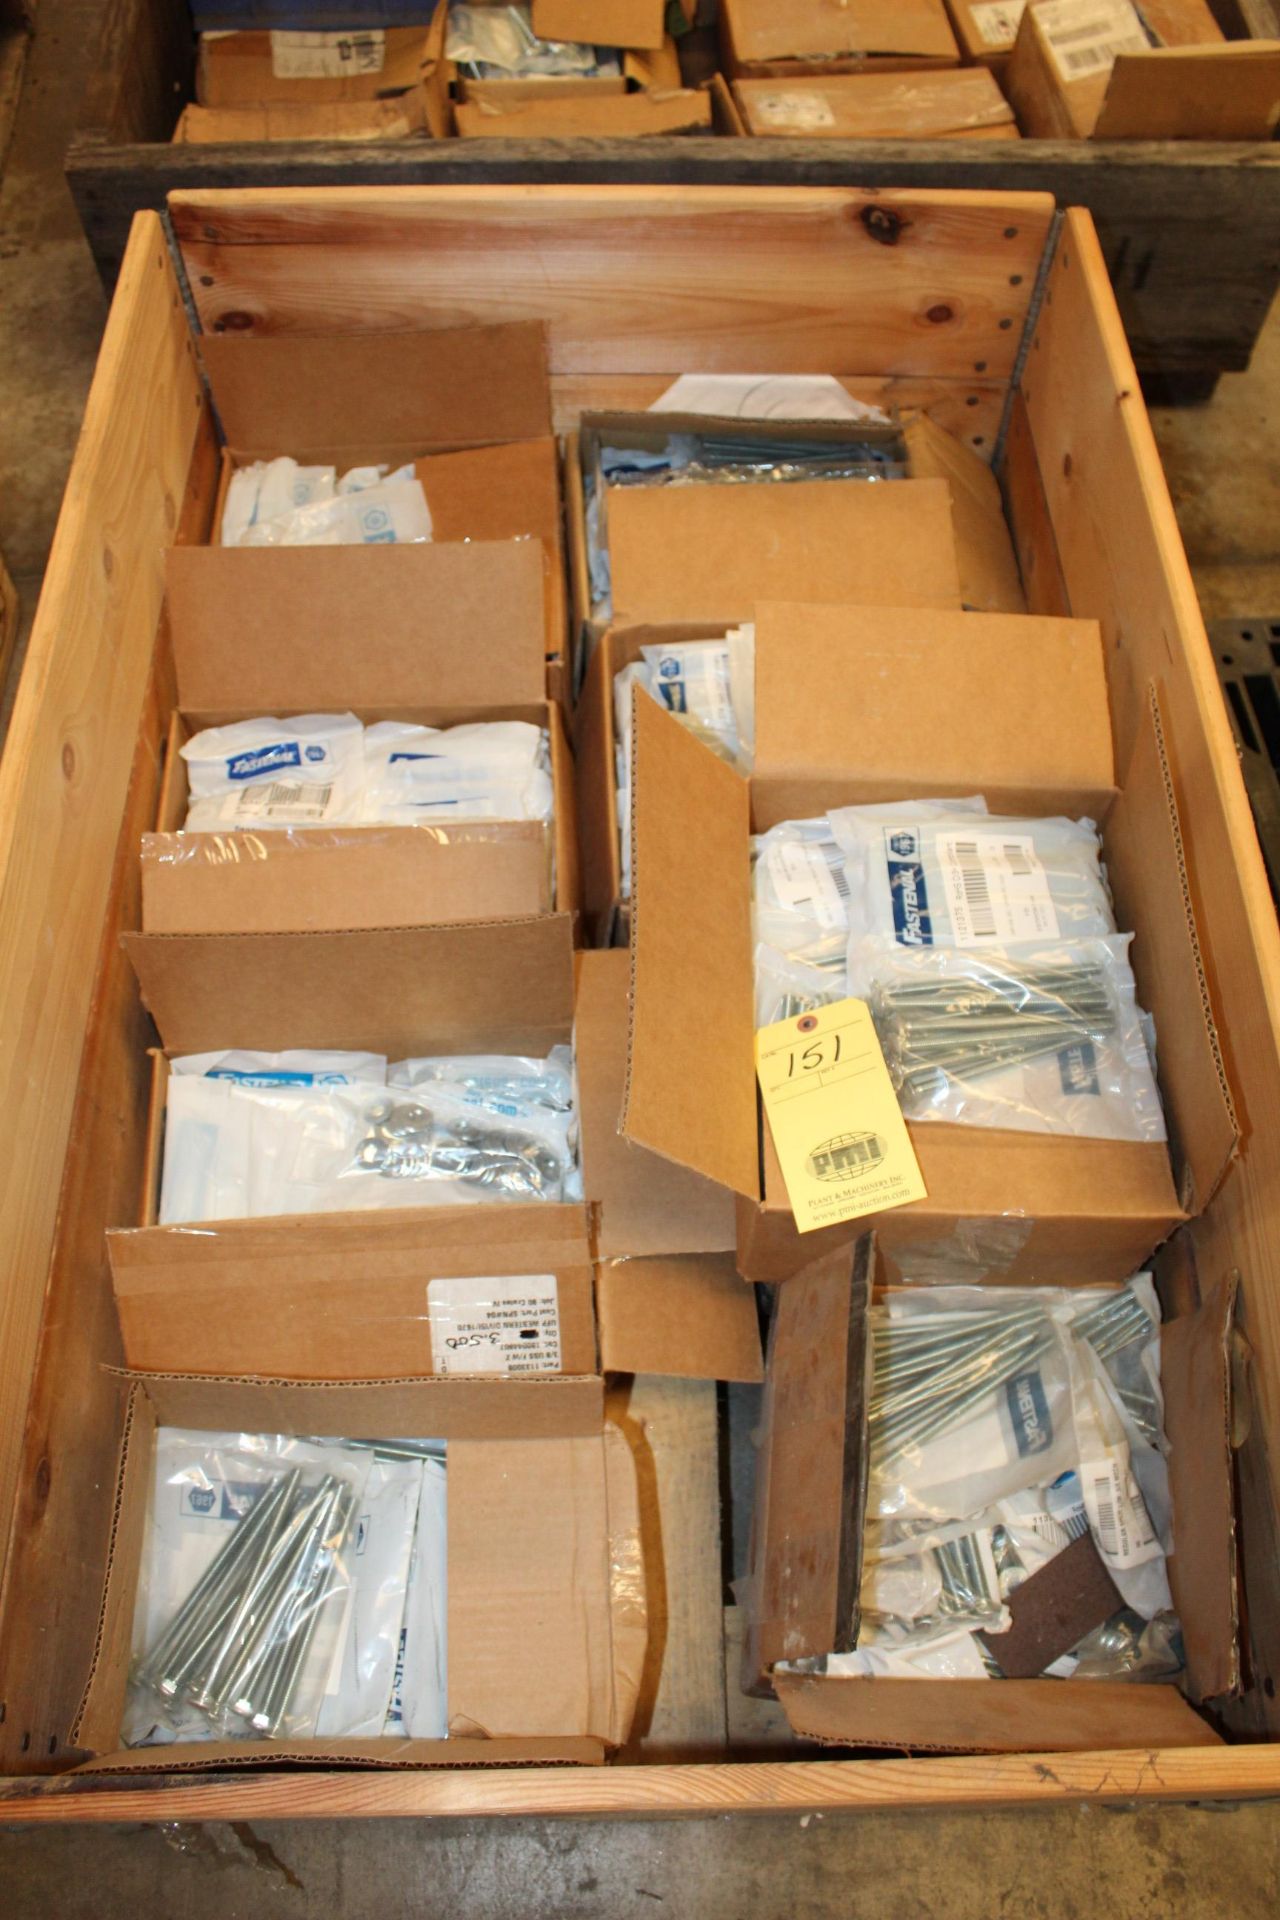 LOT CONSISTING OF: Fastenal fasteners (unused), bolts, washers, etc. (in one crate) (Located at: